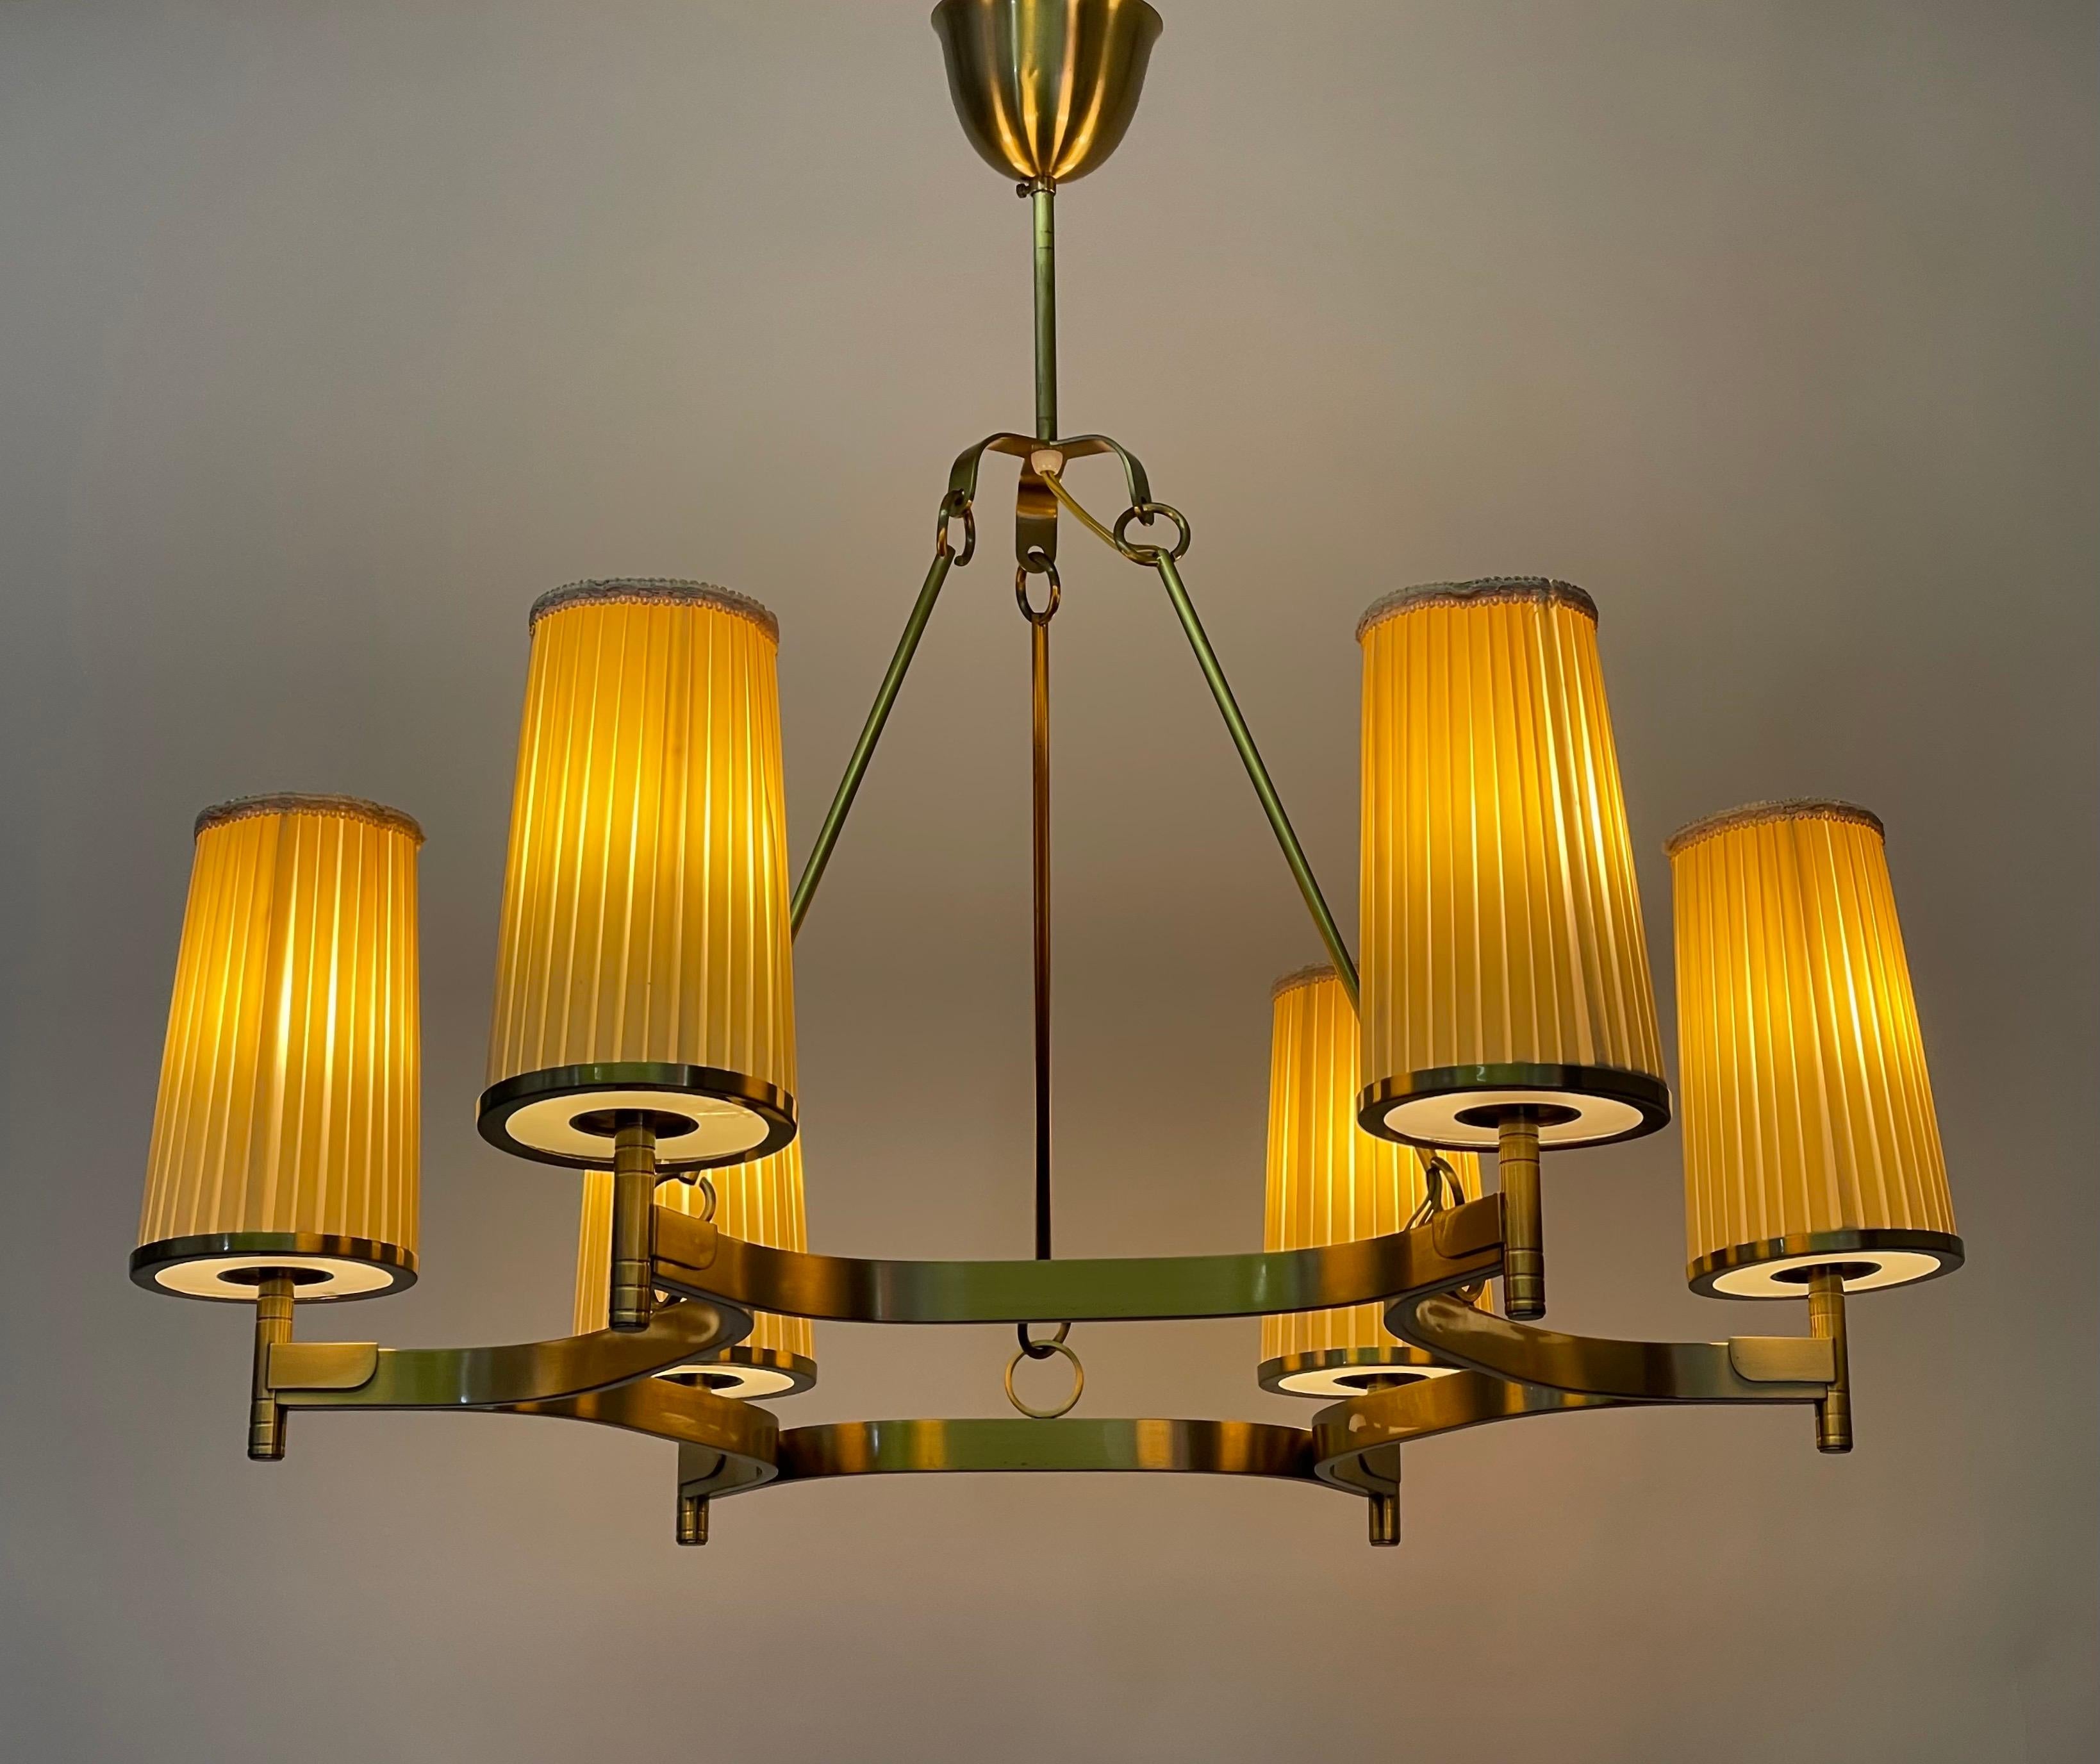 A mid-century, six -light laquiered brass of aluminium chandelier, circa 1950s.
Measurements: Height 26.37 Inches, diameter 31.49 Inches.
Socket: 6 x E27 Edison for standard screw bulbs.
 
 
  